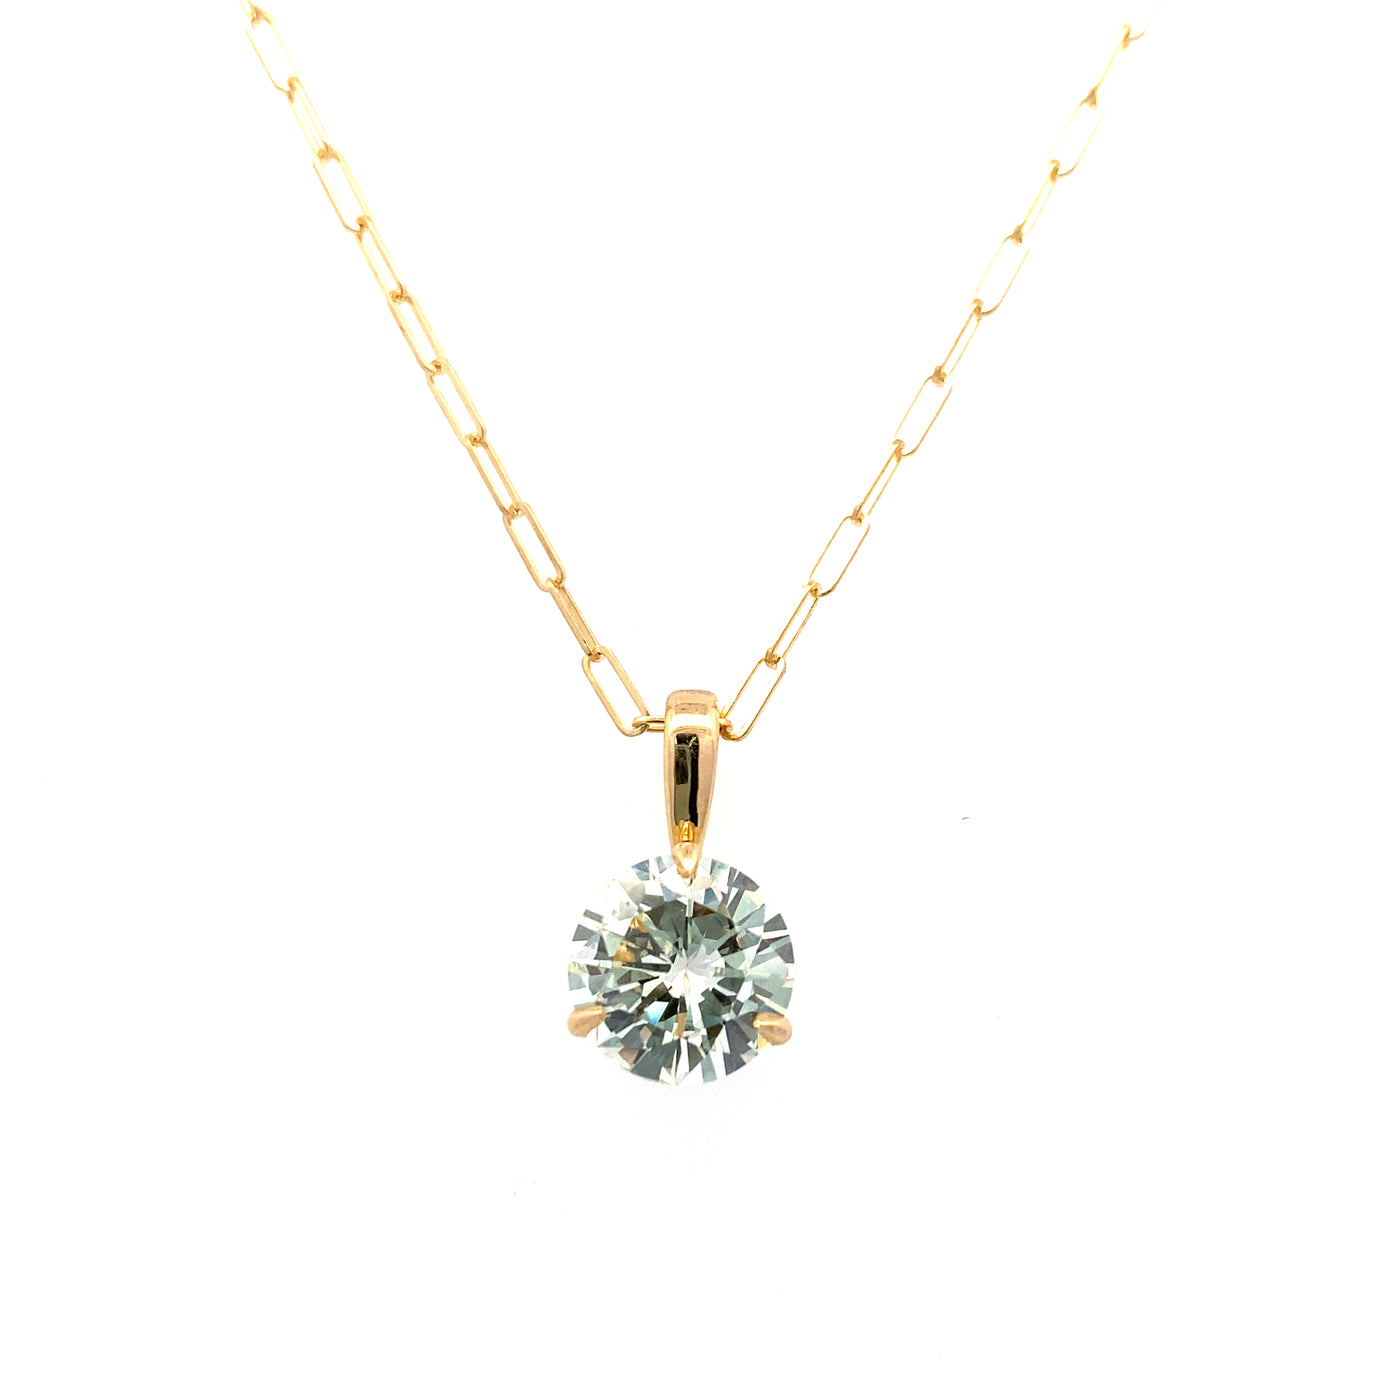 Beeghly & Co.  2.61 CT Solitaire Diamond Pendants